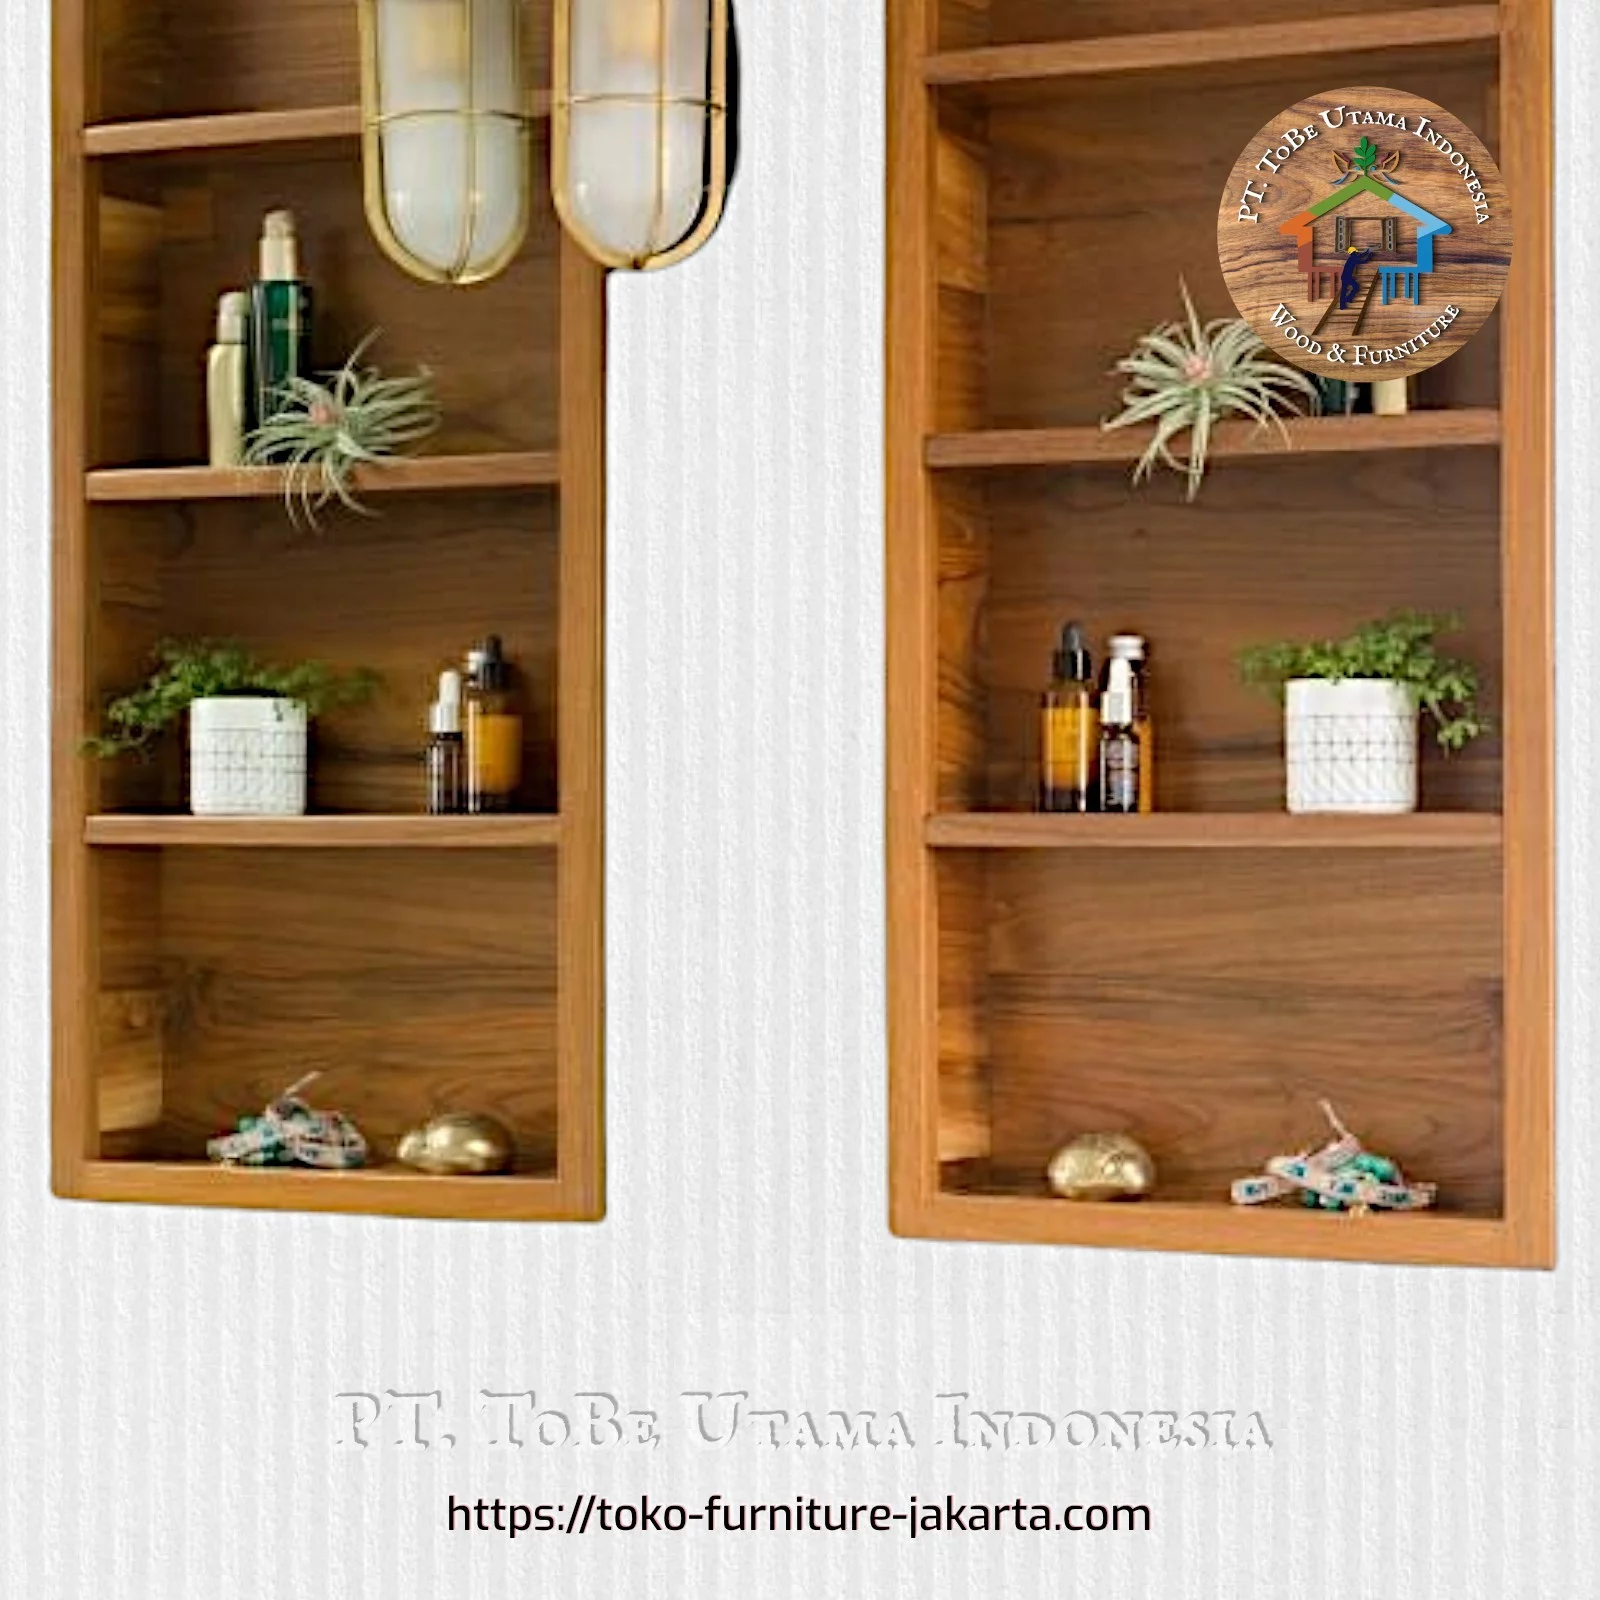 Accessories - Wall Decoration: Wall Showcase made of plywood (image 1 of 1).